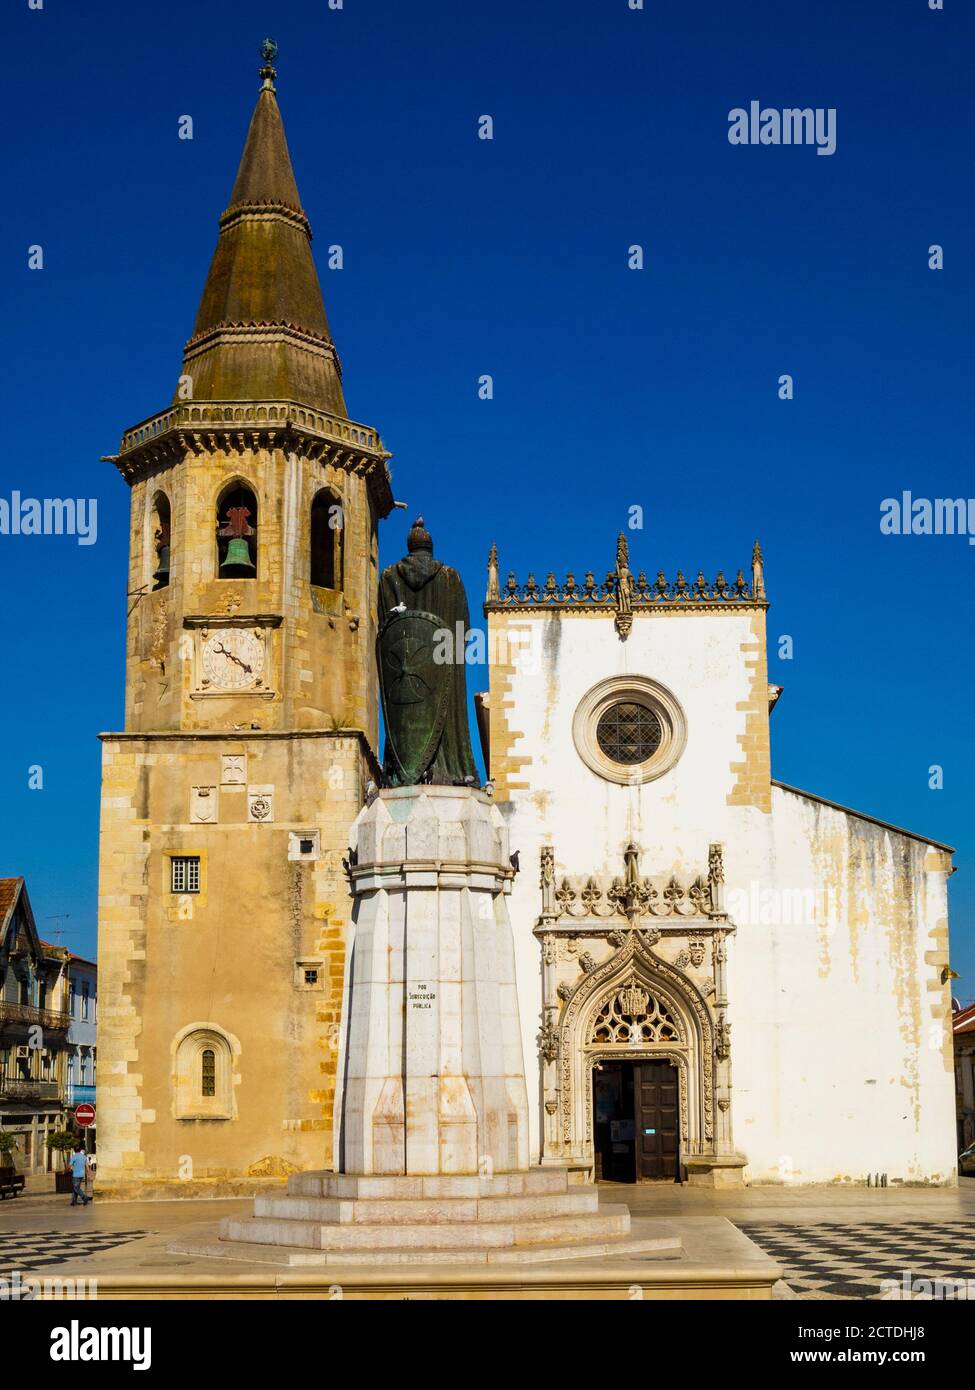 The octagonal bell tower of Saint John the Baptist church and Christ Order knight D.Gualdim Pais statue on Republic Square in old town. Tomar Portugal Stock Photo